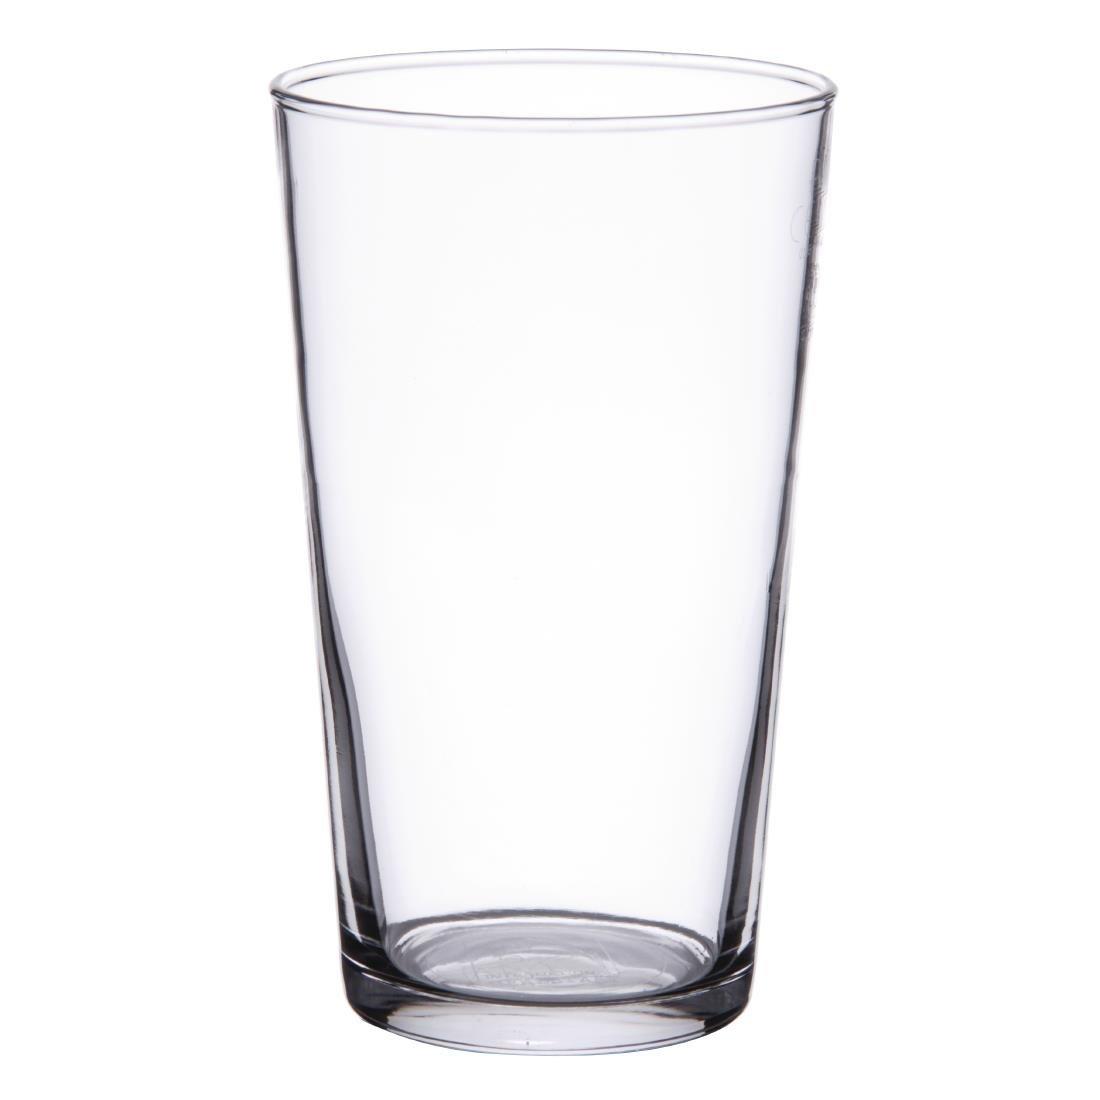 Y707 - Conical Beer Glass